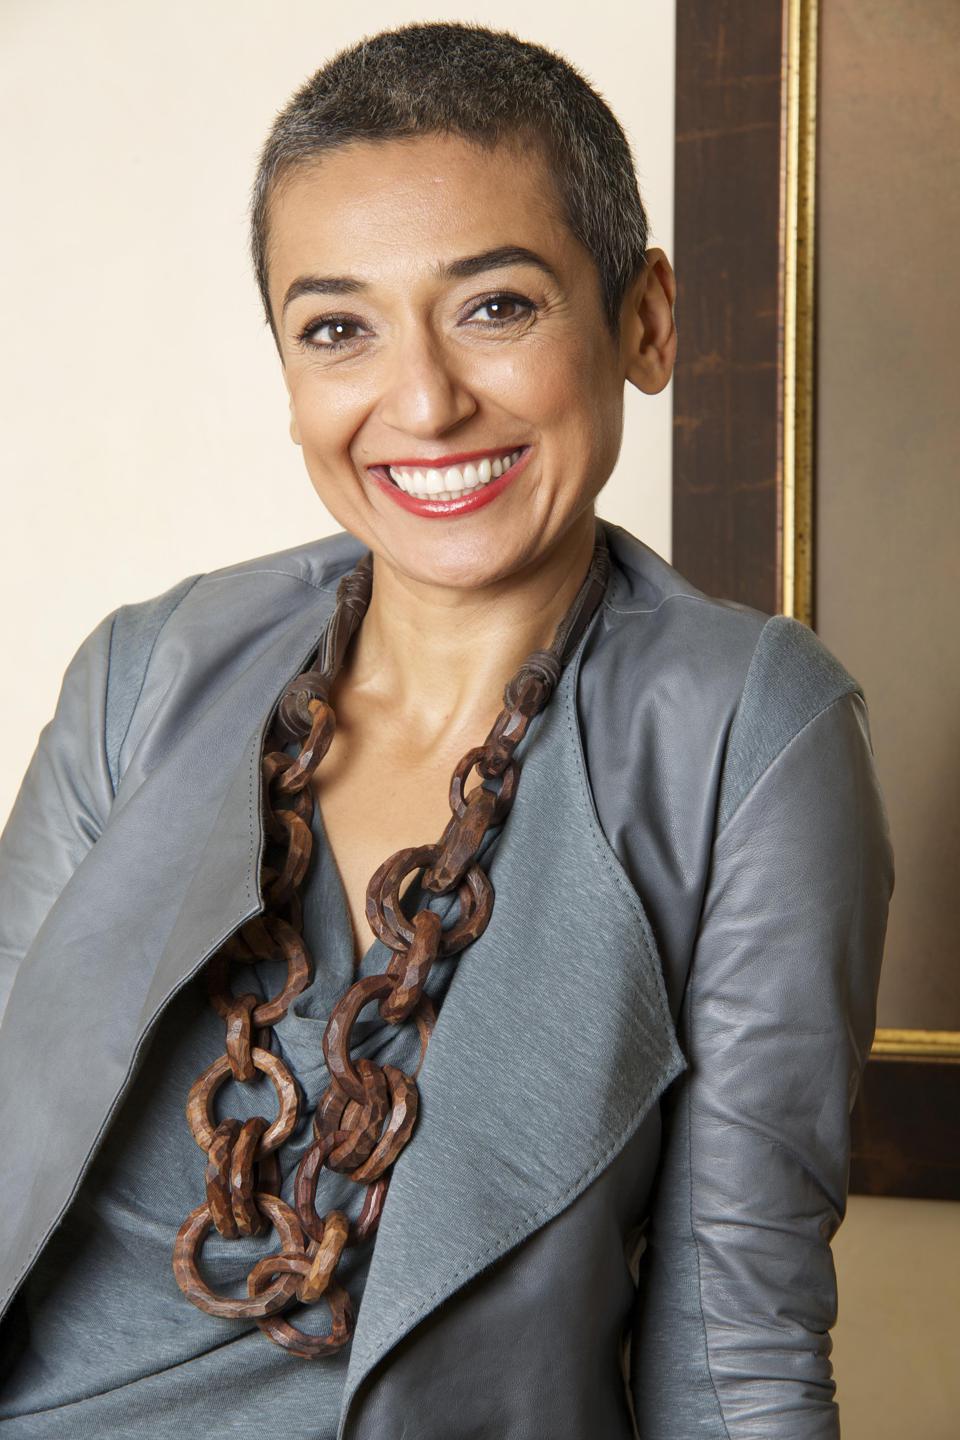 Portrait of a smiling woman, with a necklace and grey outfit.